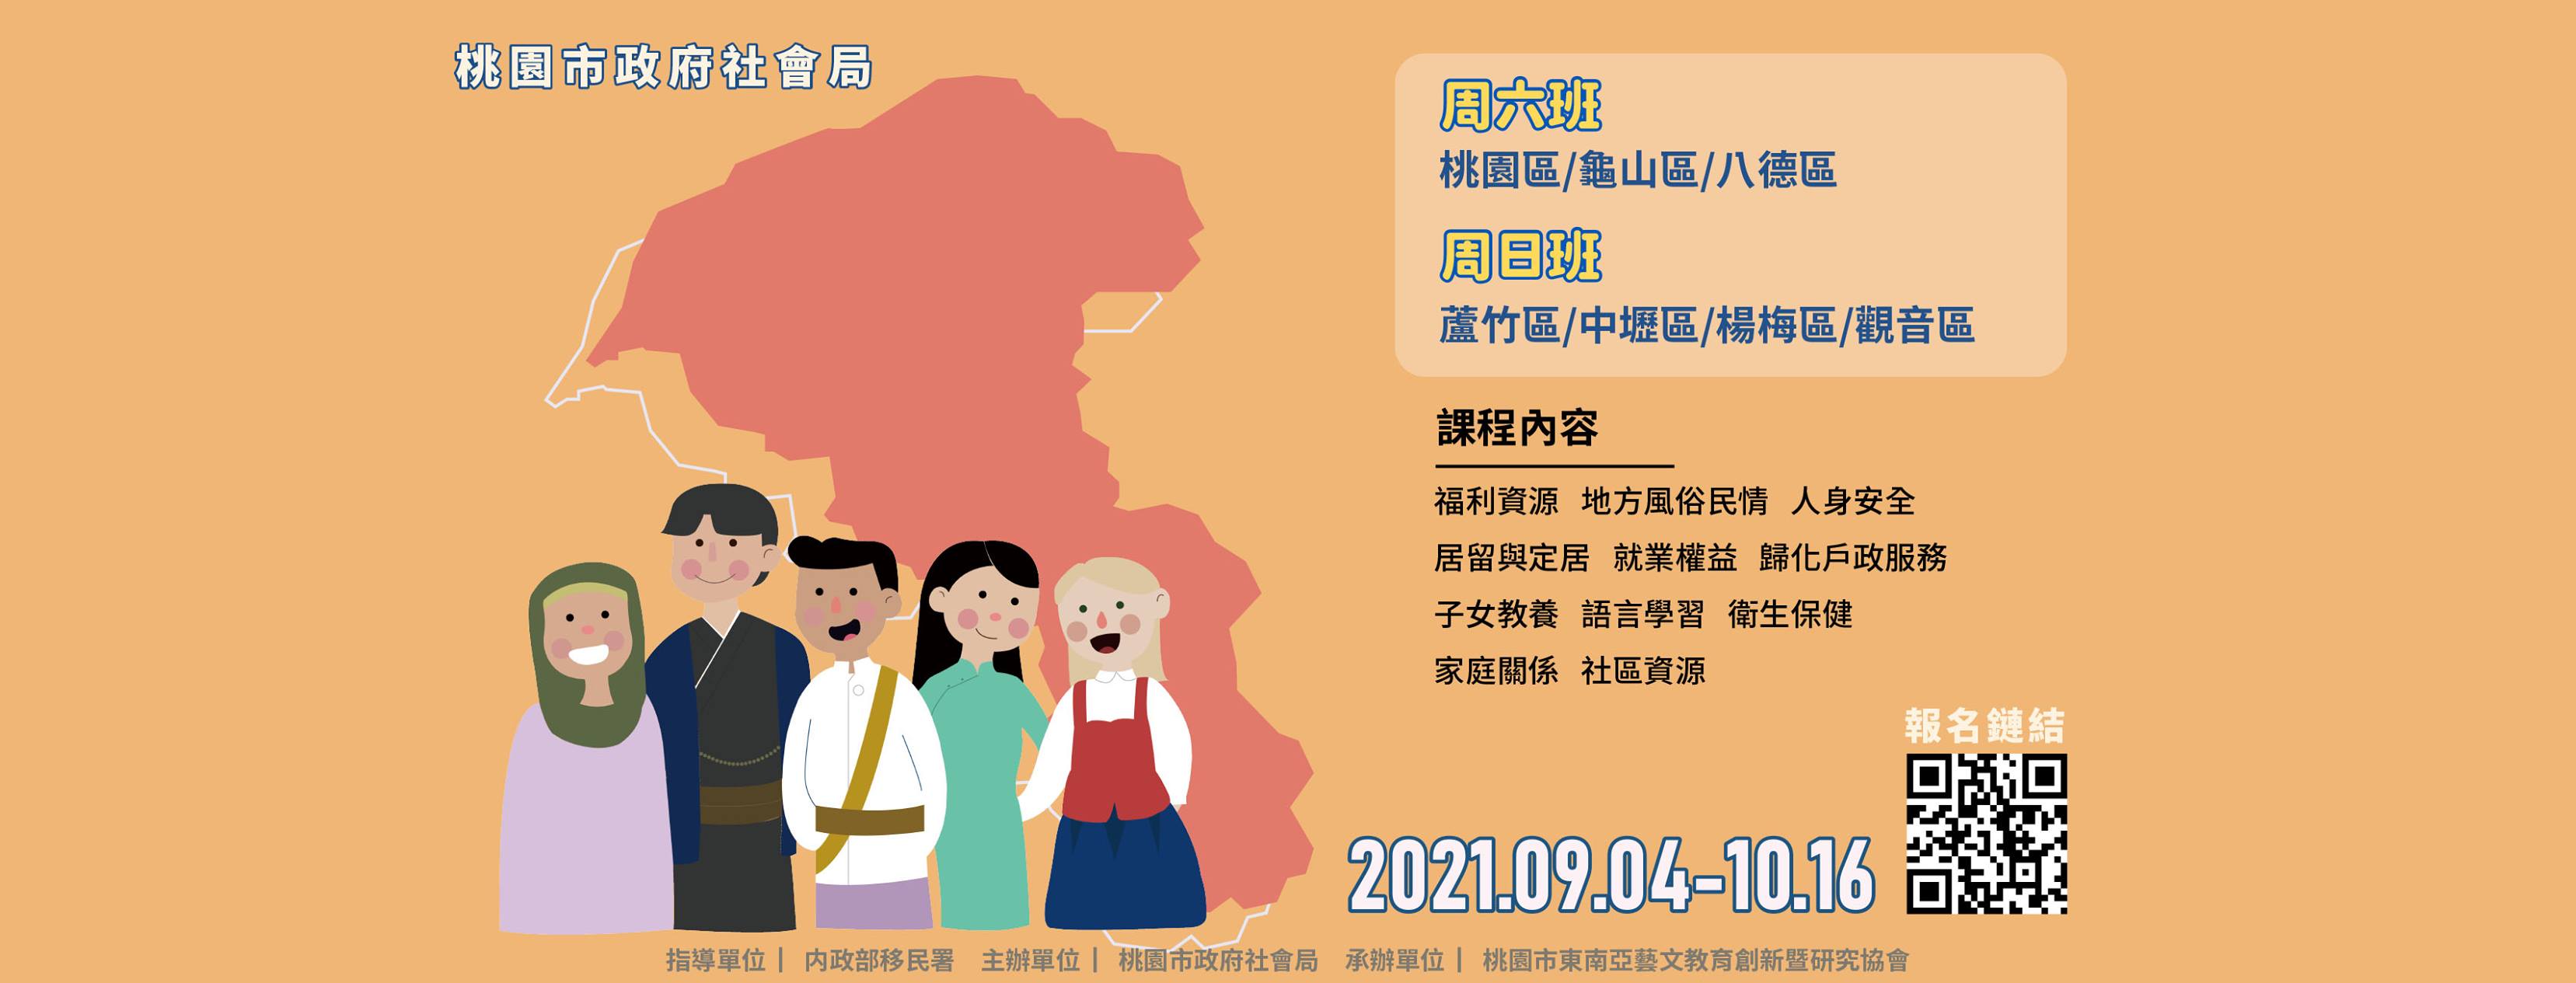 Courses are offered in seven districts of Taoyuan City. Photo/Provided by Taoyuan Department of Social Welfare